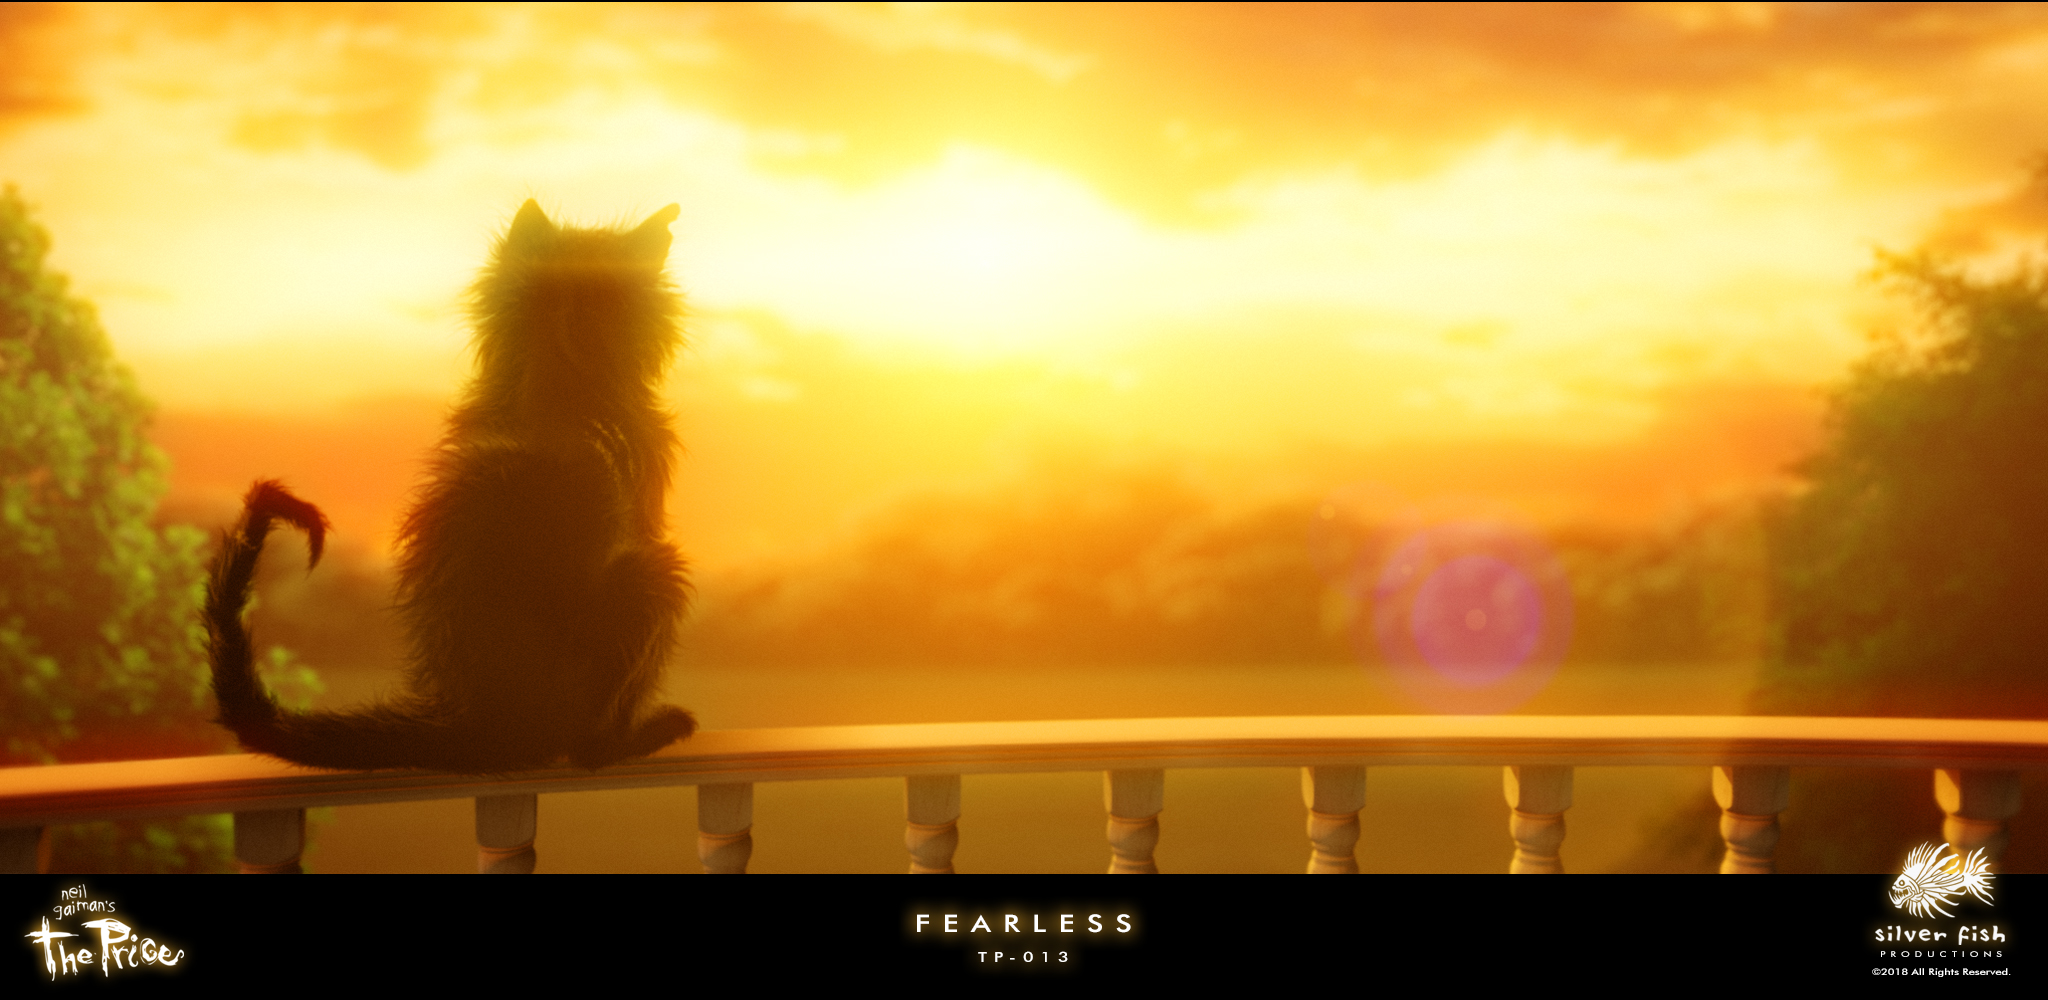 Fearless_TP-013